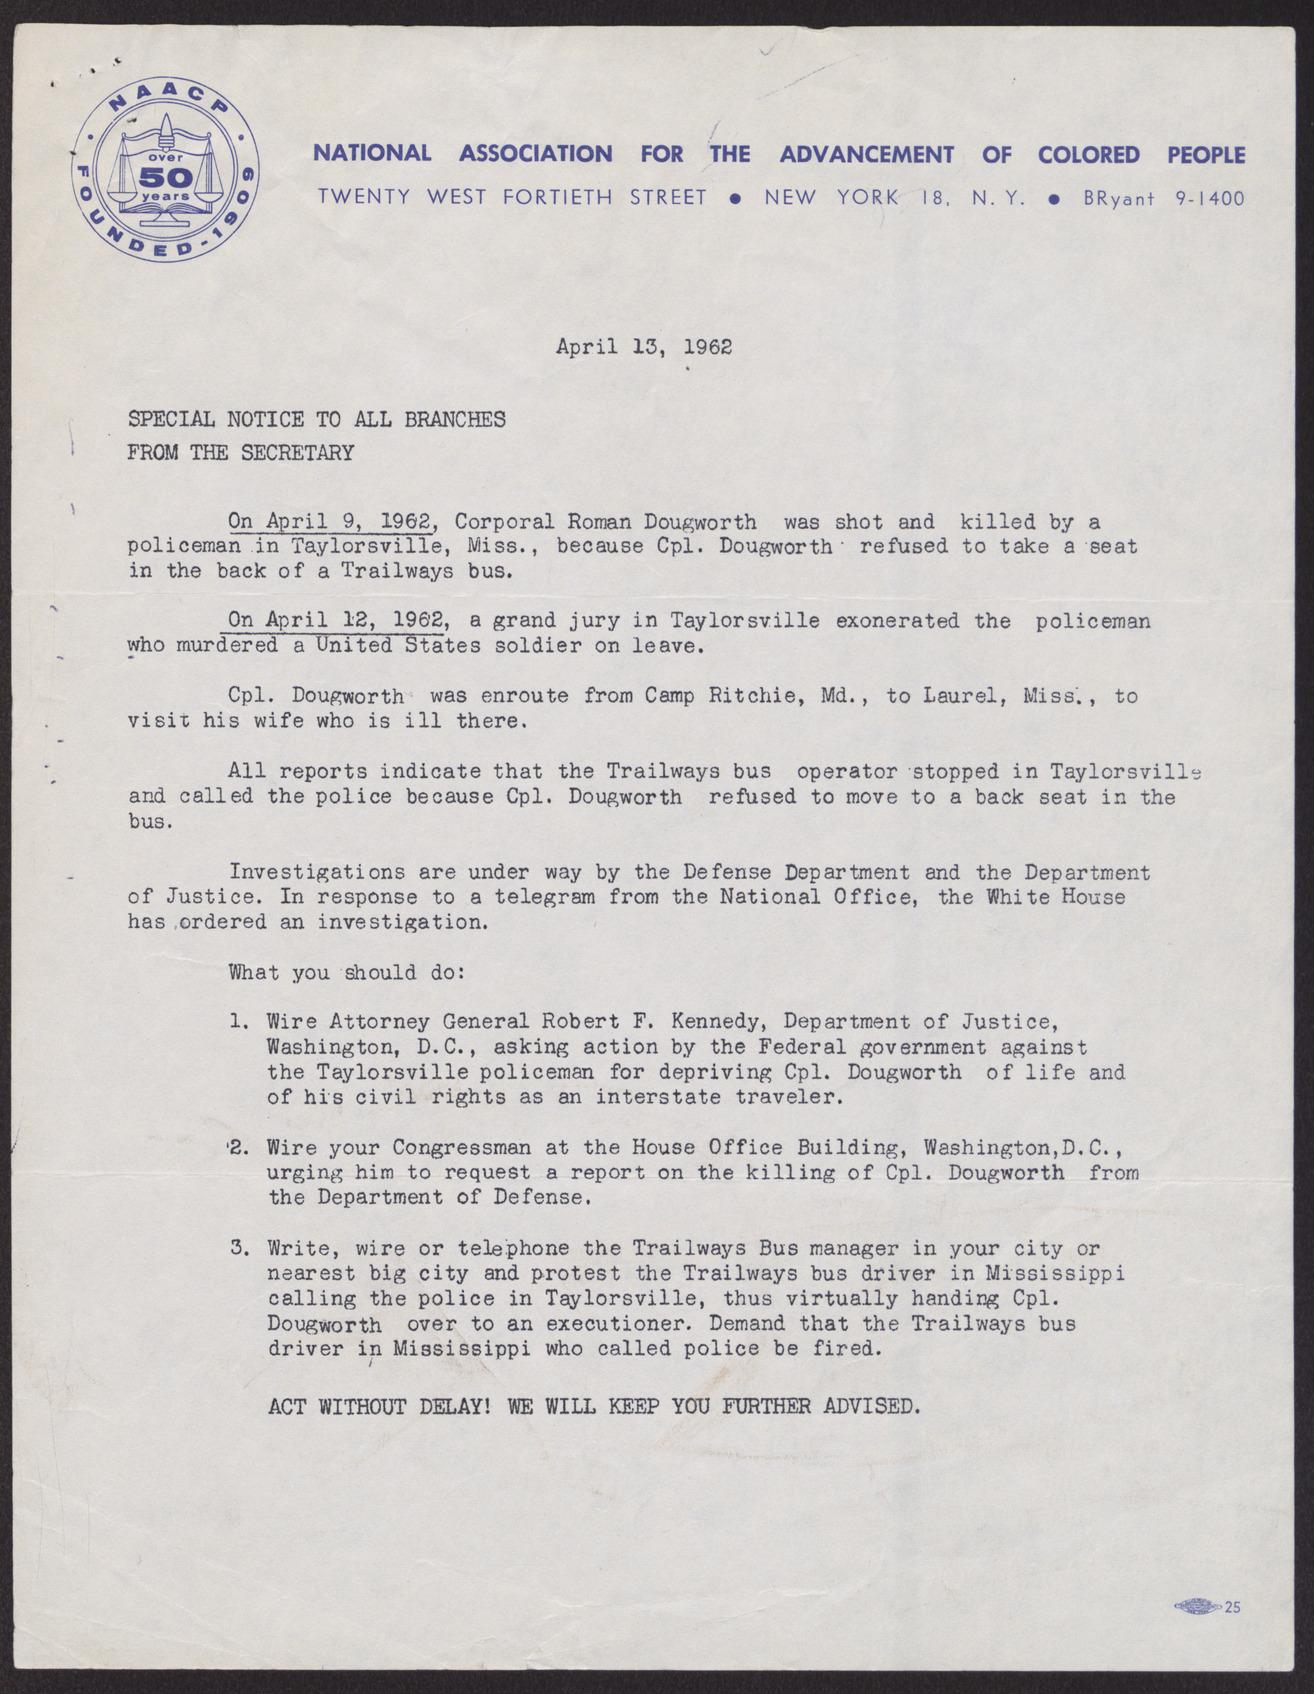 Special notice to all NAACP branches, April 13, 1962